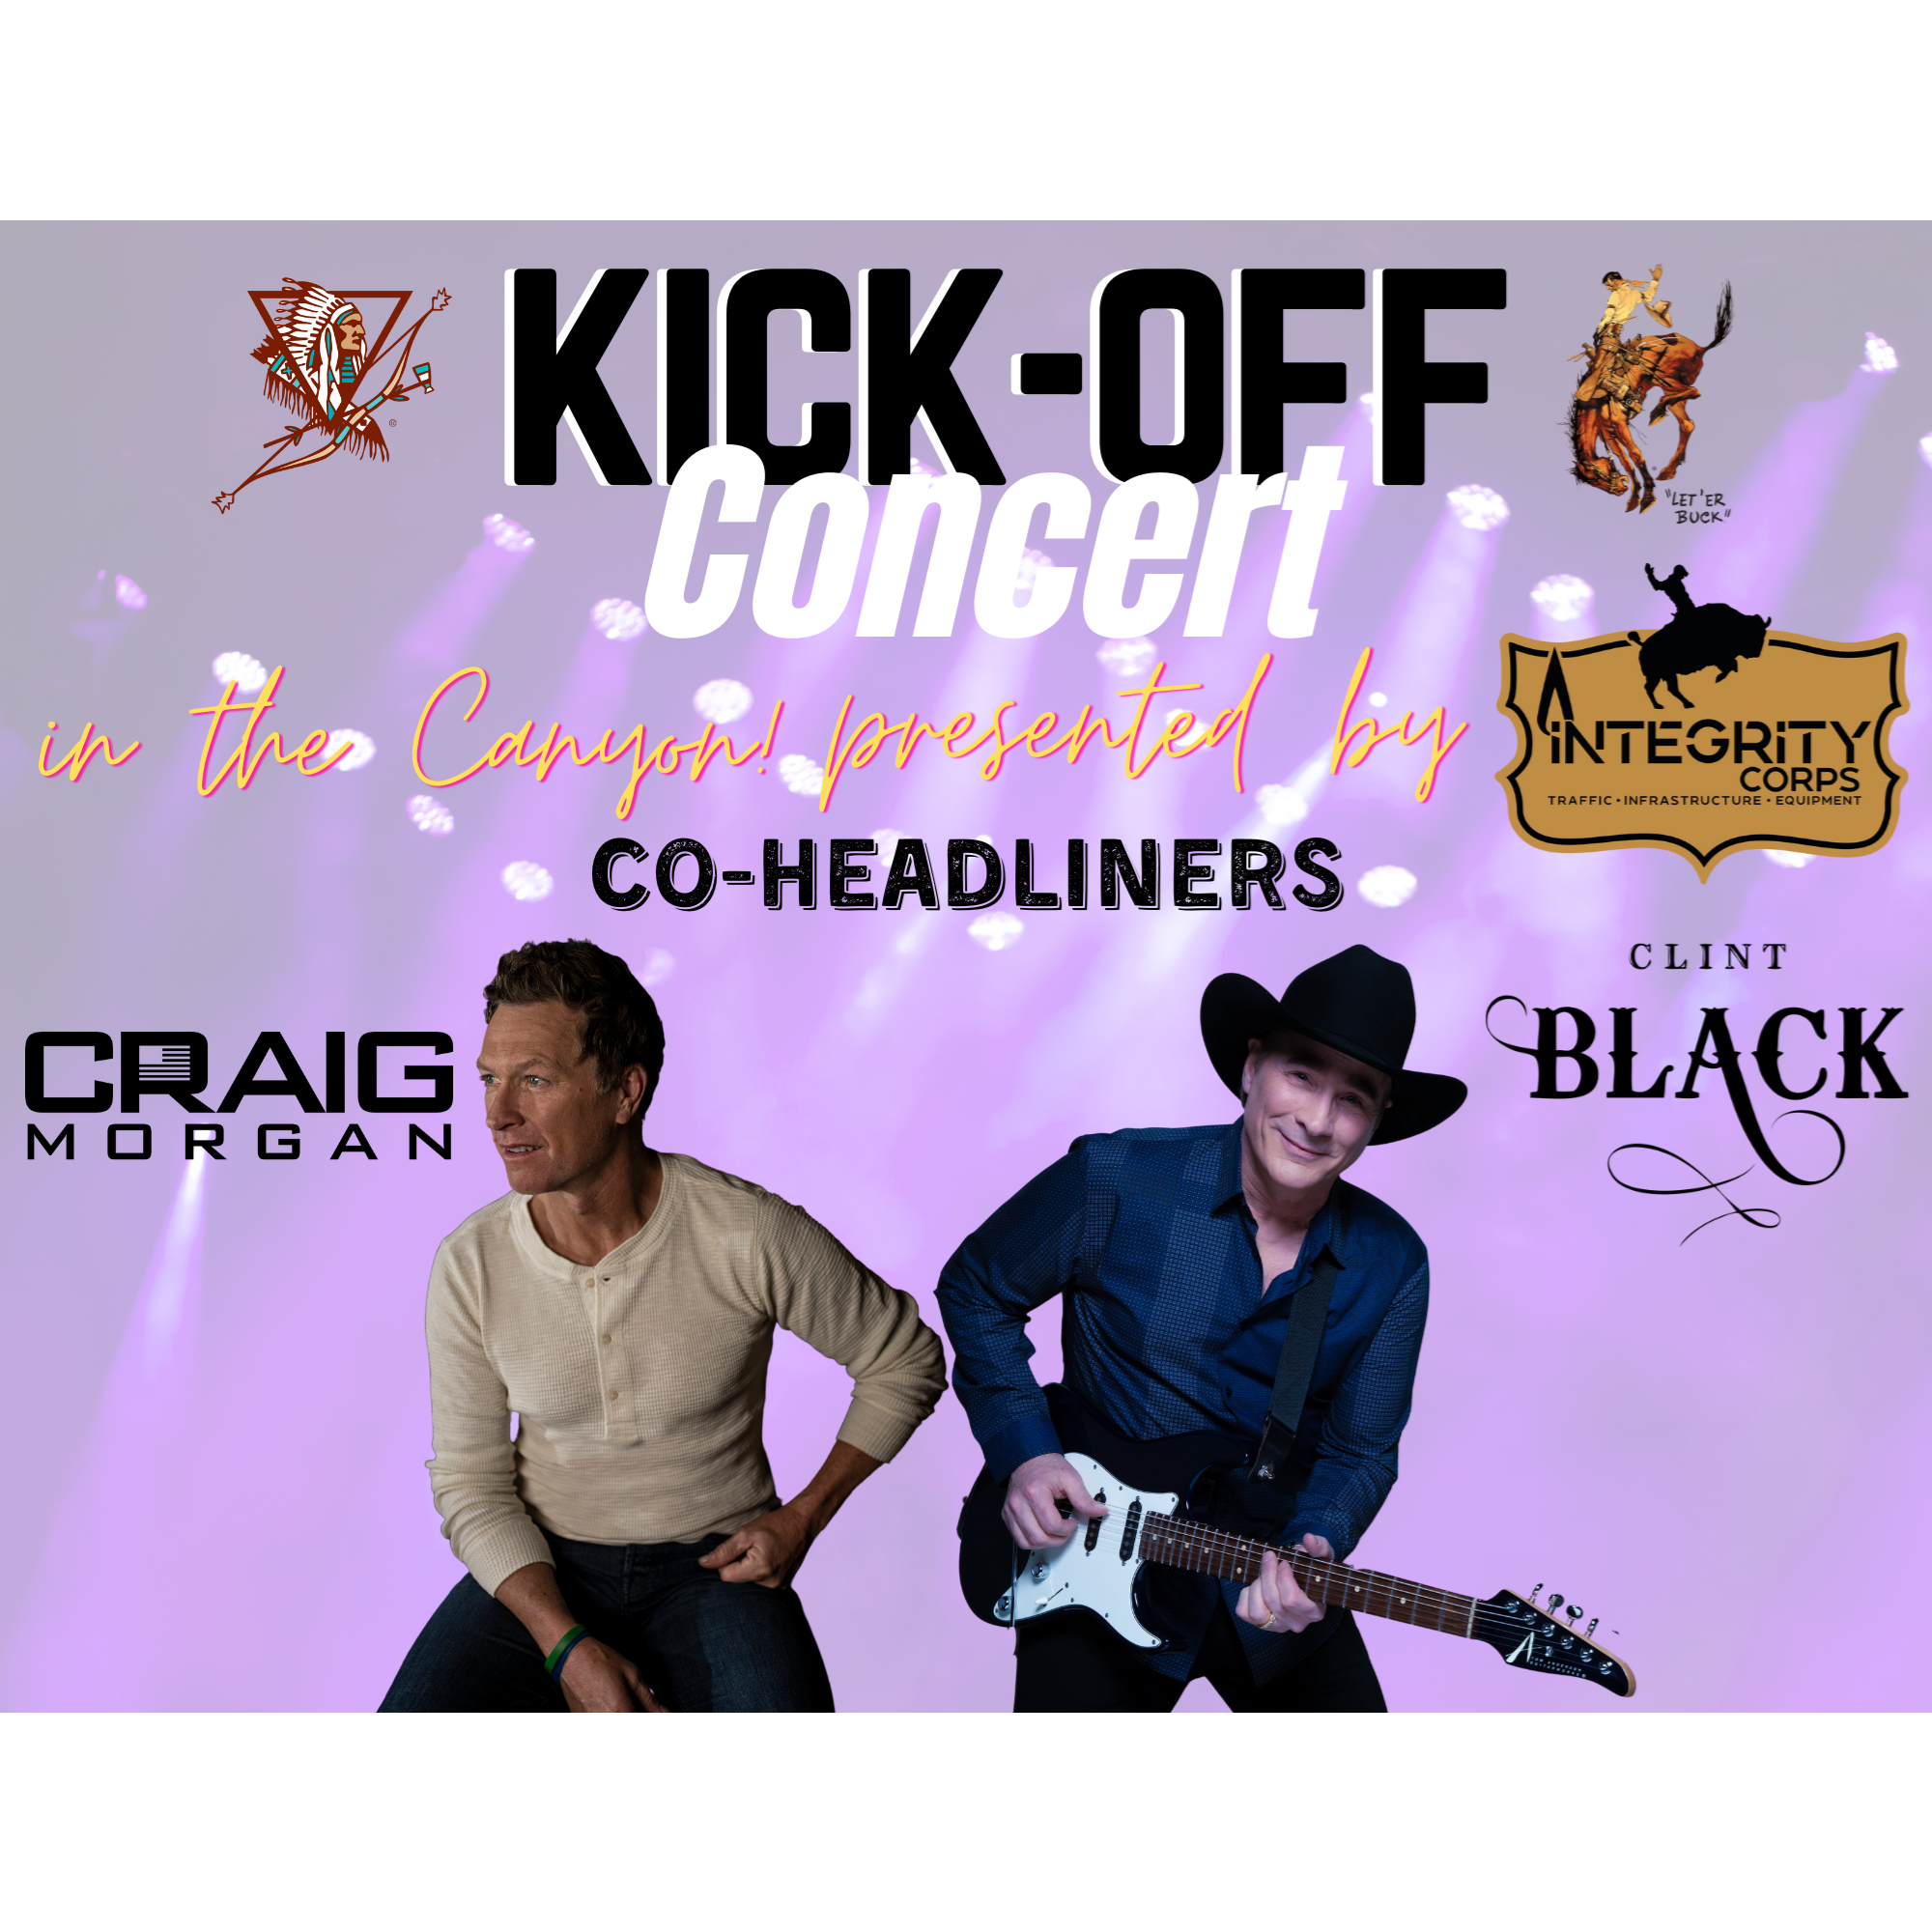 Kick-Off Concert presented by Integrity Corps